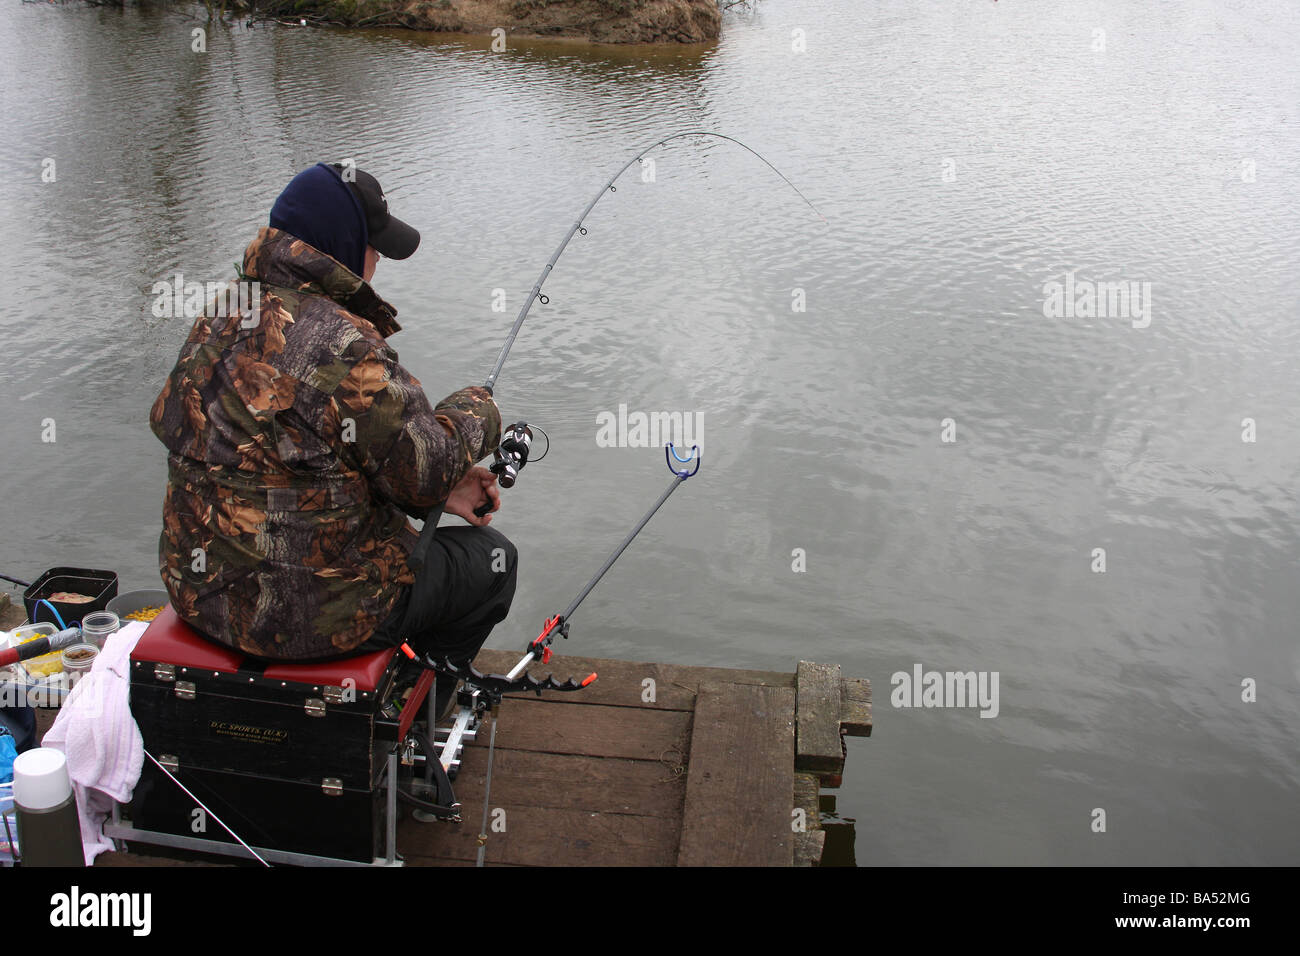 Angler playing large carp in commercial fishing pond in England. Stock Photo